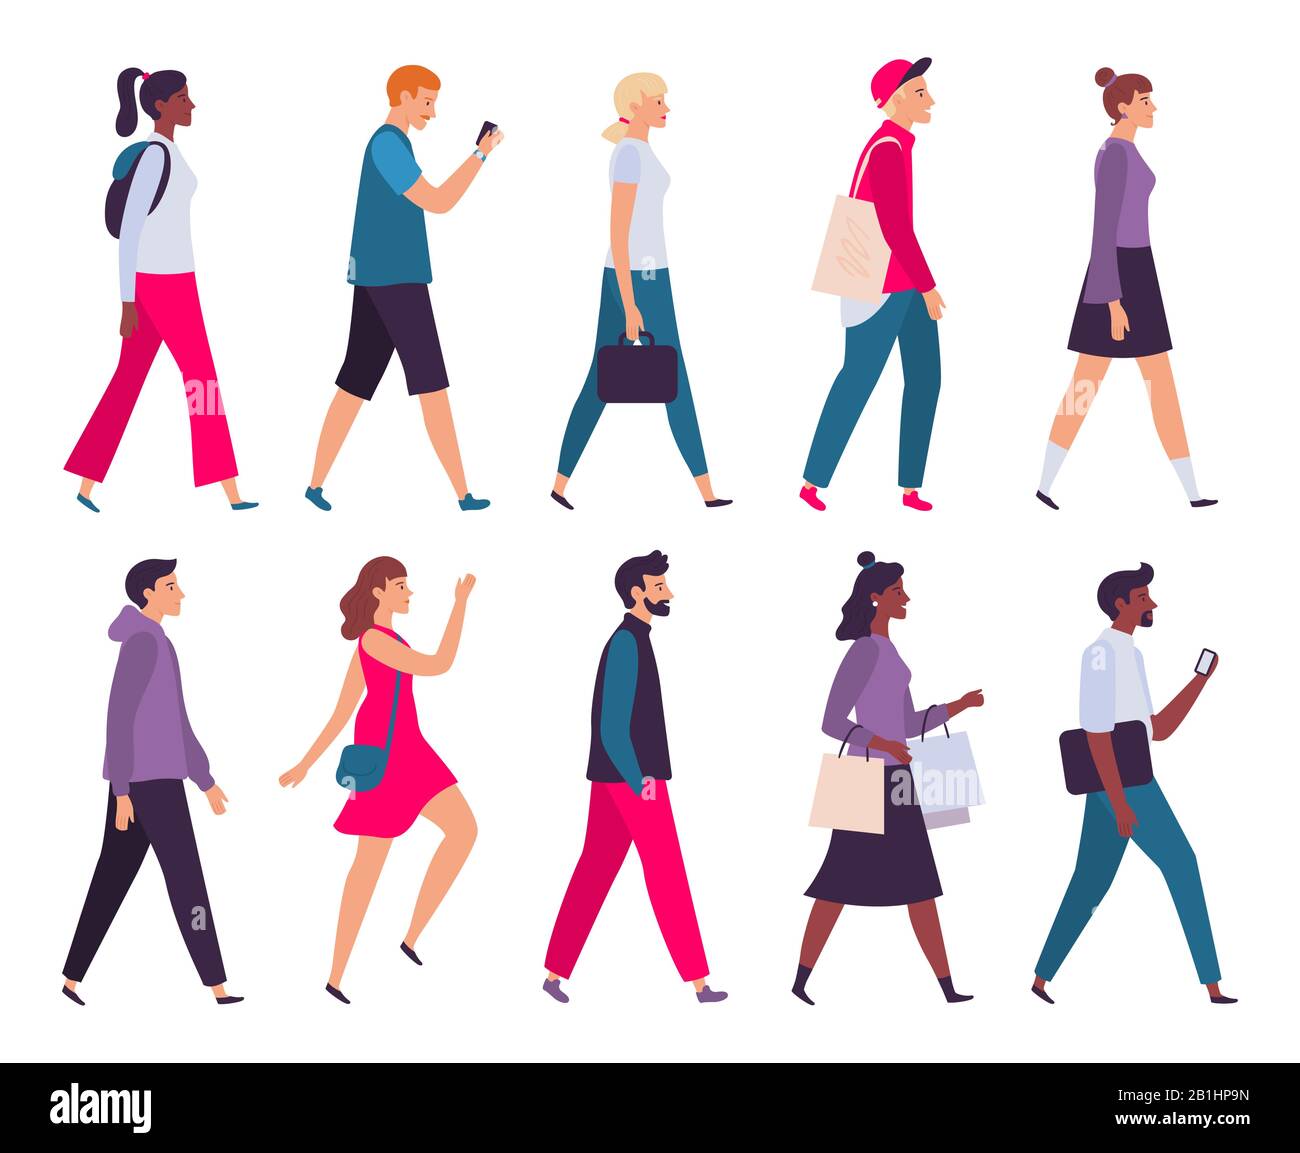 Walking people. Men and women profile, side view walk person and walkers characters vector illustration set Stock Vector